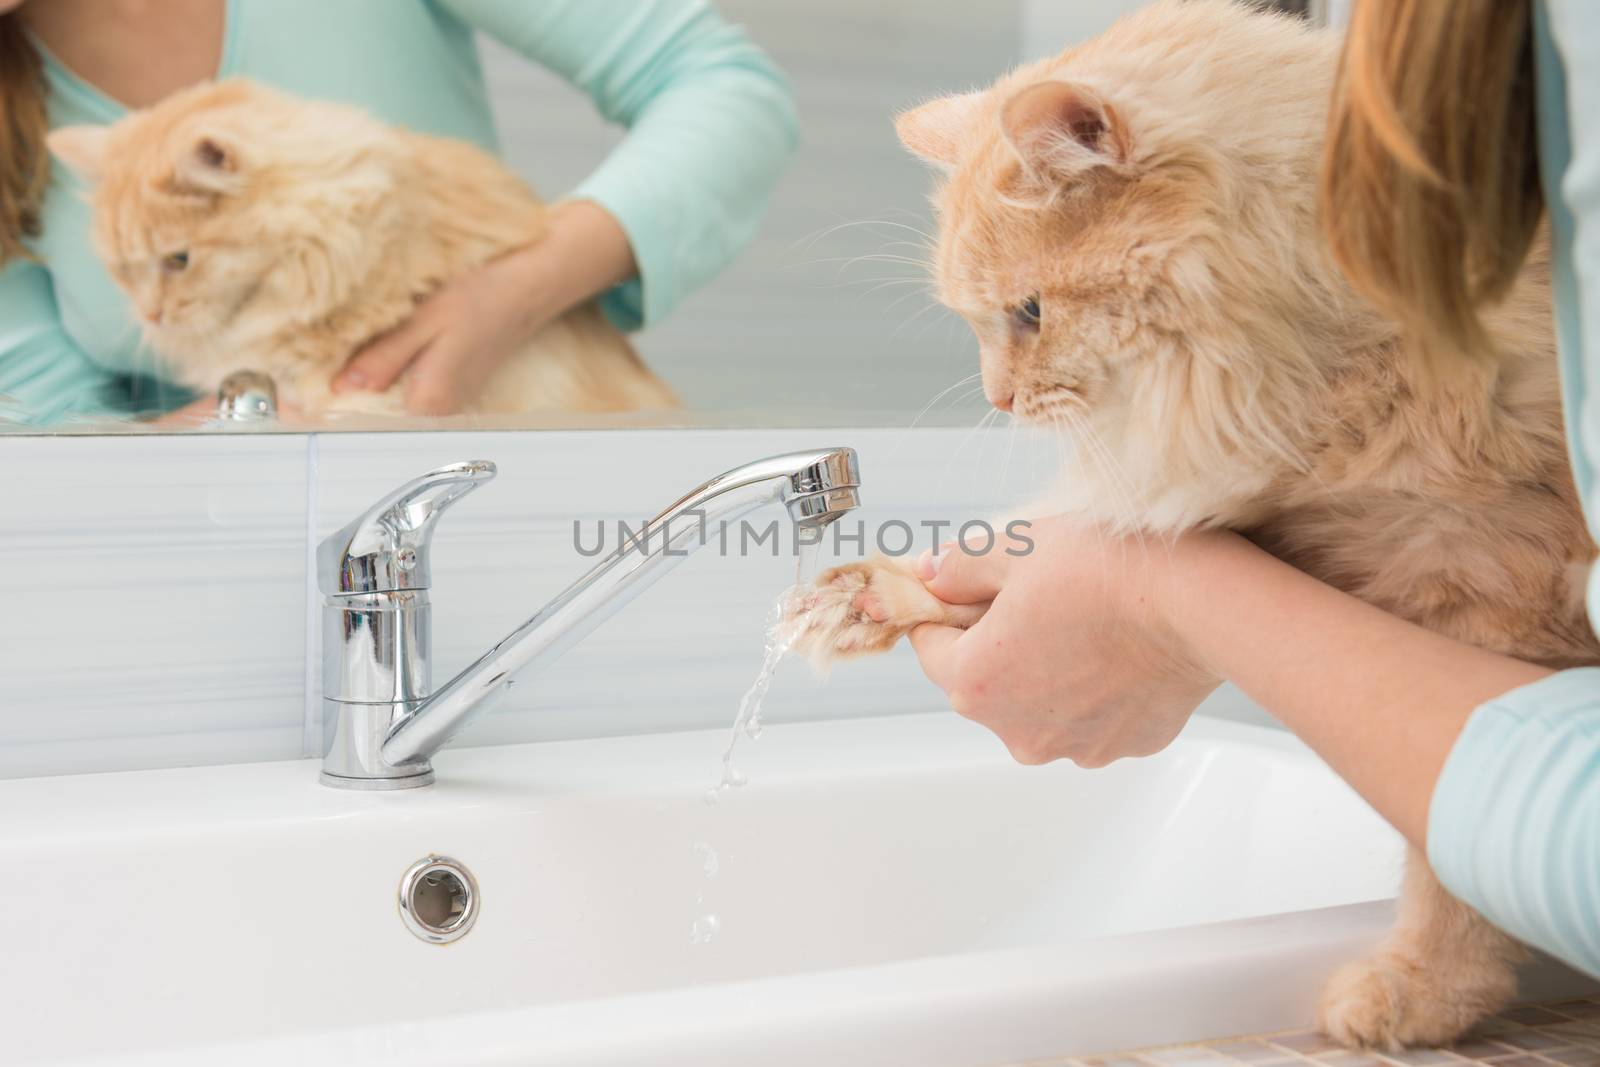 A girl washes a cat's paw under a stream of water from a washbasin mixer in the bathroom by Madhourse